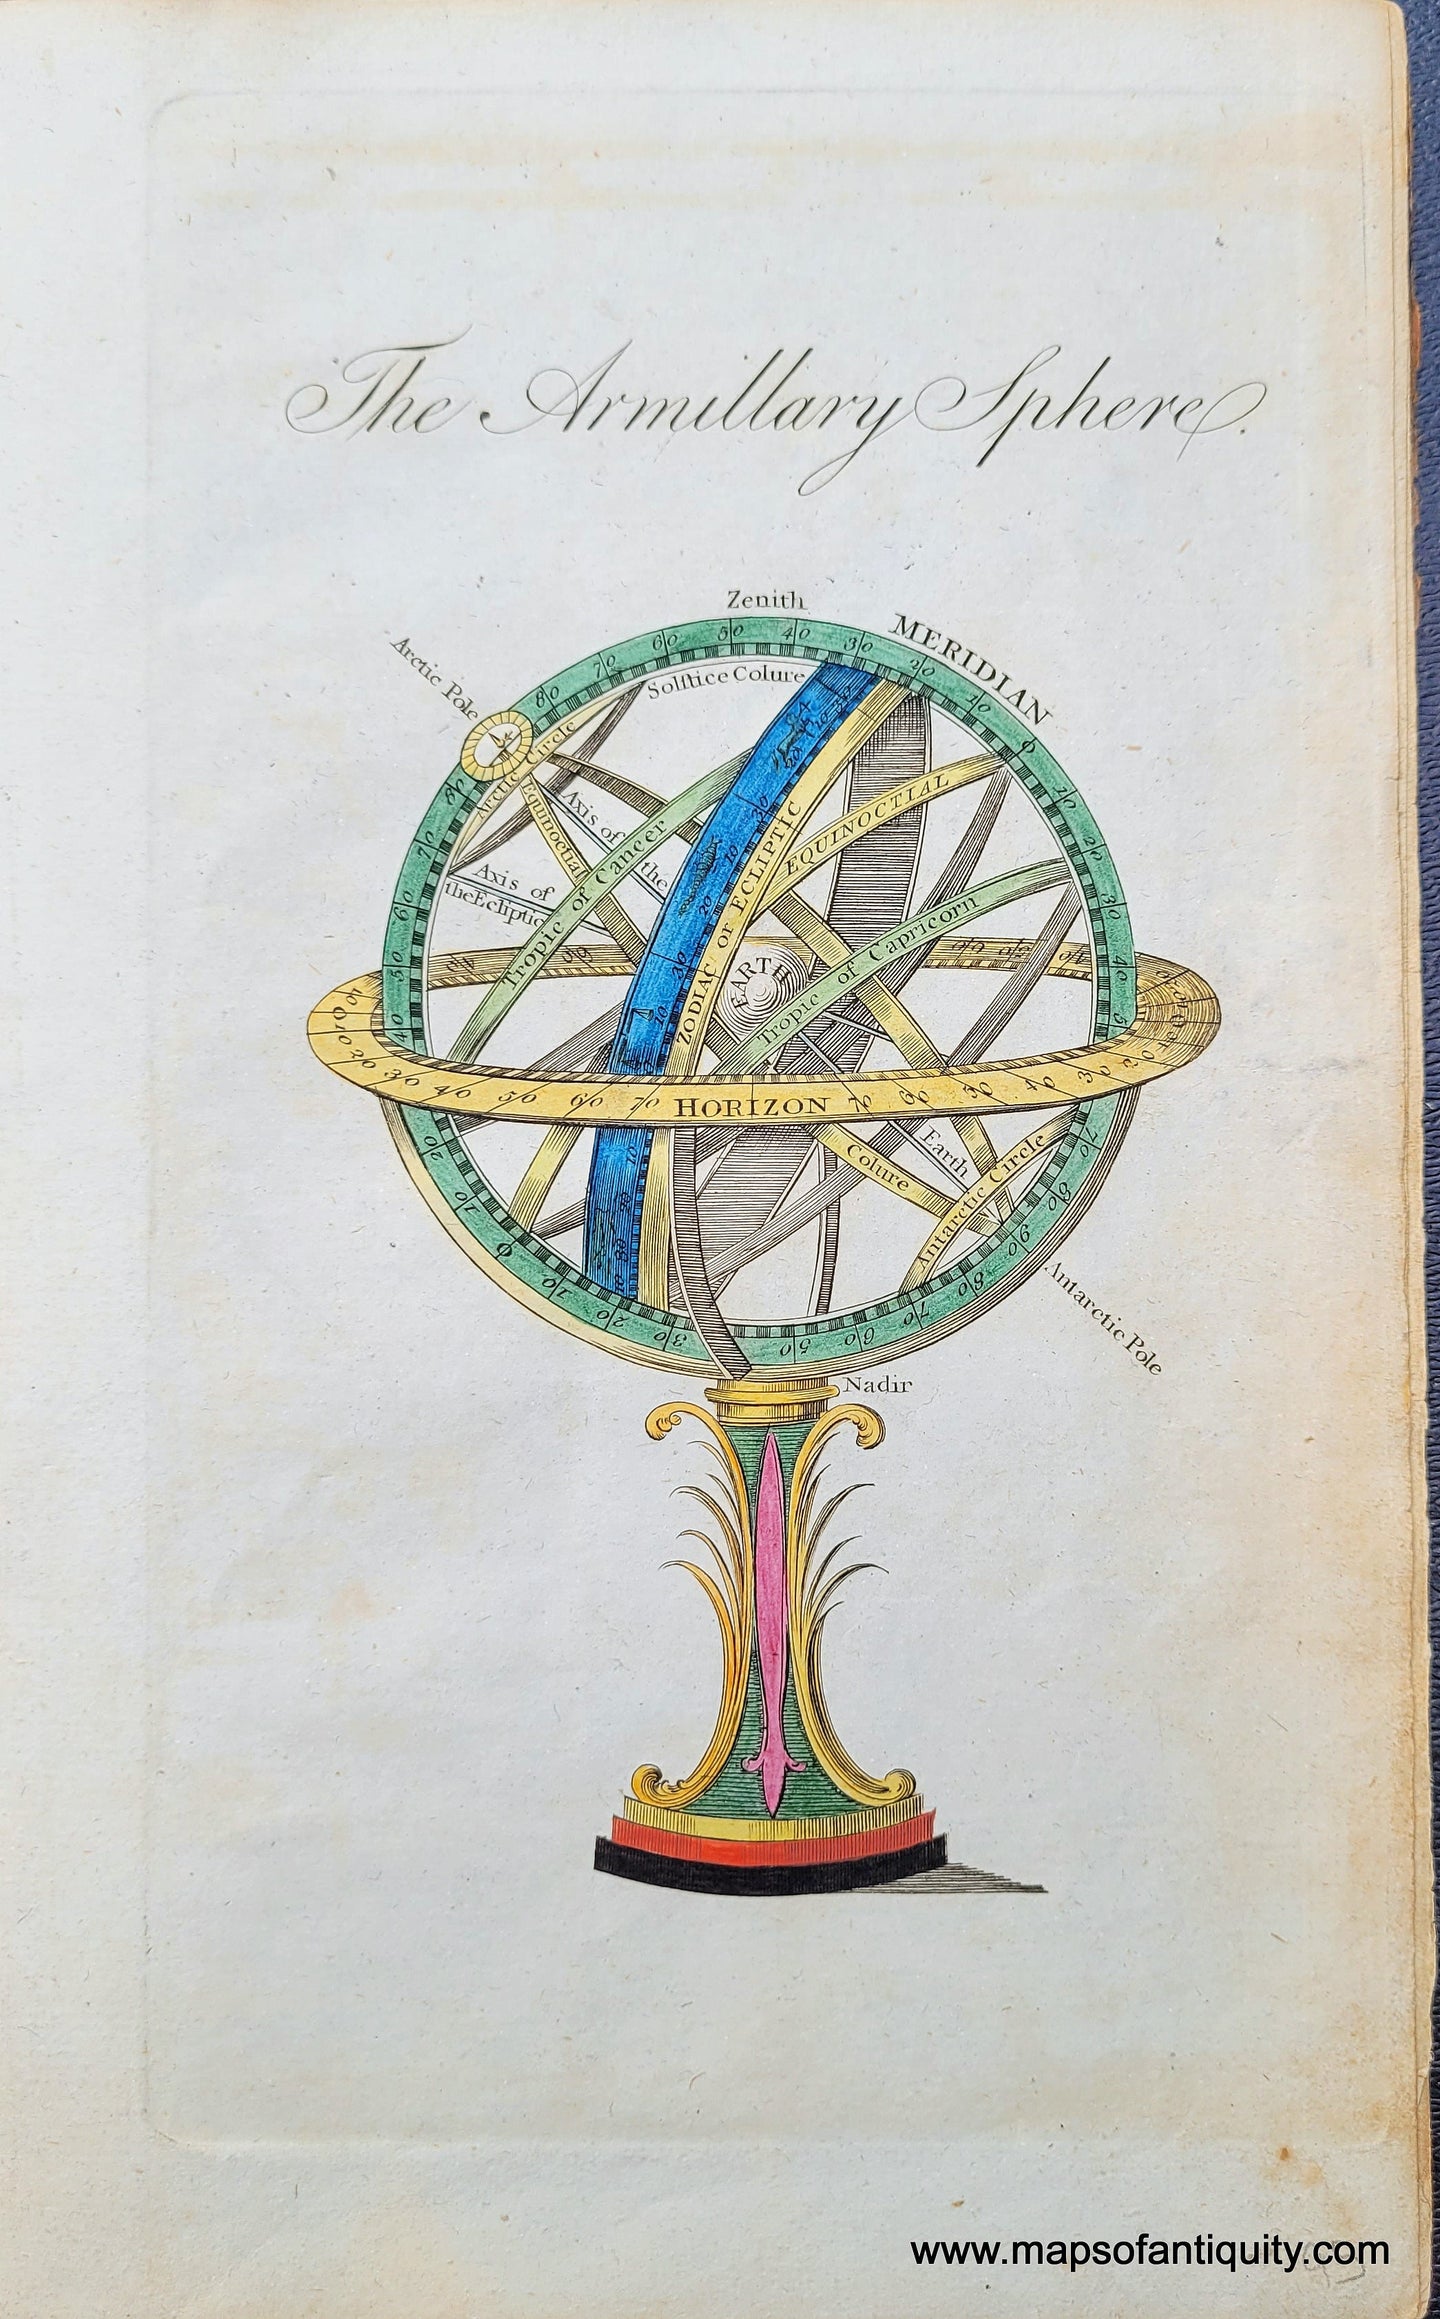 Genuine-Antique-Print-The-Armillary-Sphere-1800-Guthrie-Maps-Of-Antiquity